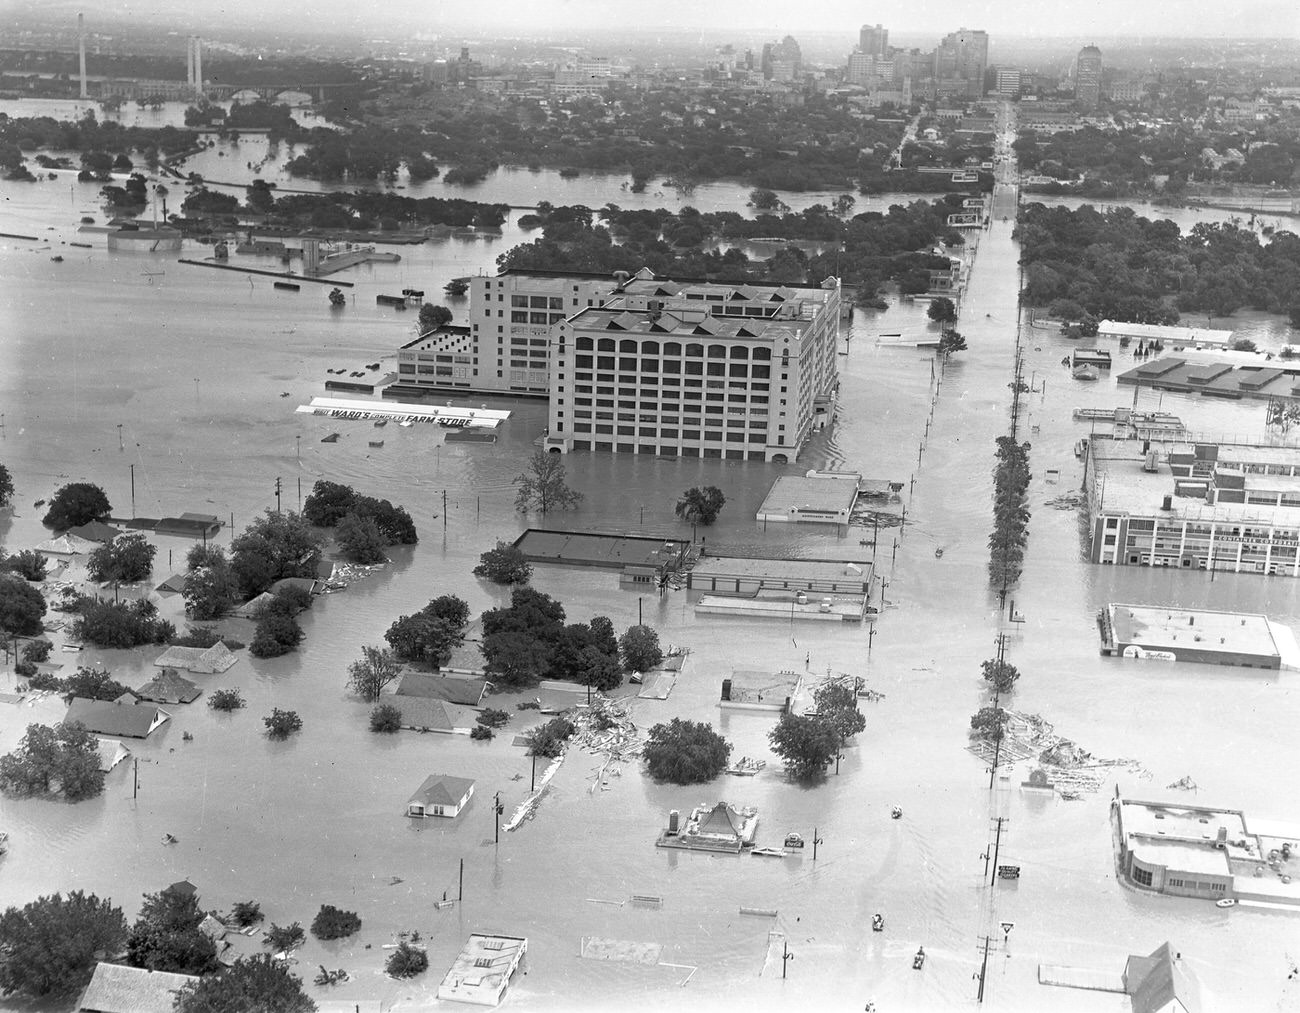 Fort Worth, Texas, flood of 1949, showing 7th Street under water. The large Montgomery Ward building in the upper center received extensive damage.